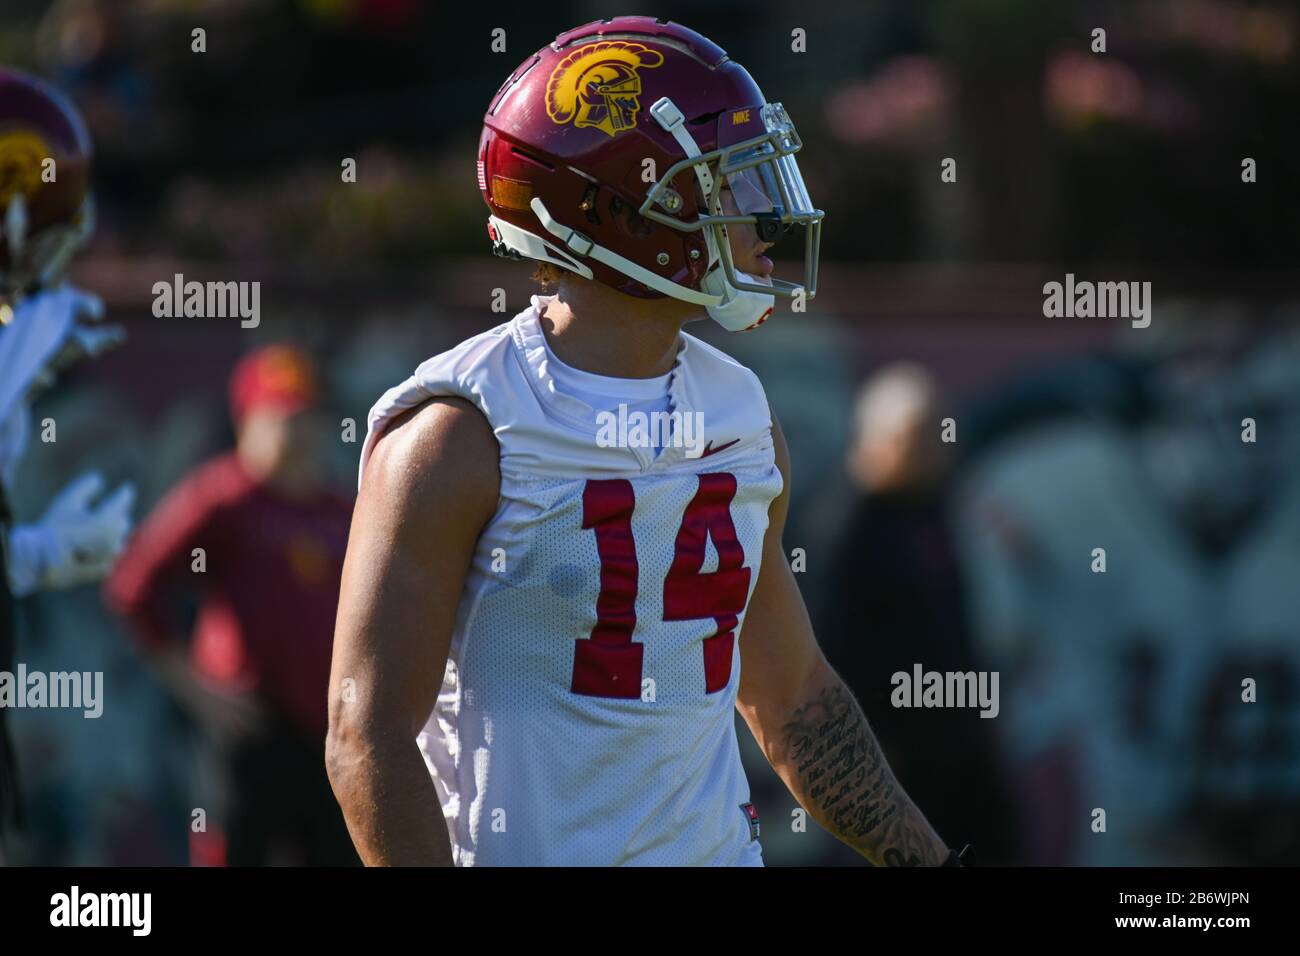 Southern California Trojans cornerback Jayden Williams (14) during the first day of spring practice, Wednesday, Mar 11, 2020, in Los Angeles. California, USA. (Photo by IOS/Espa-Images) Stock Photo